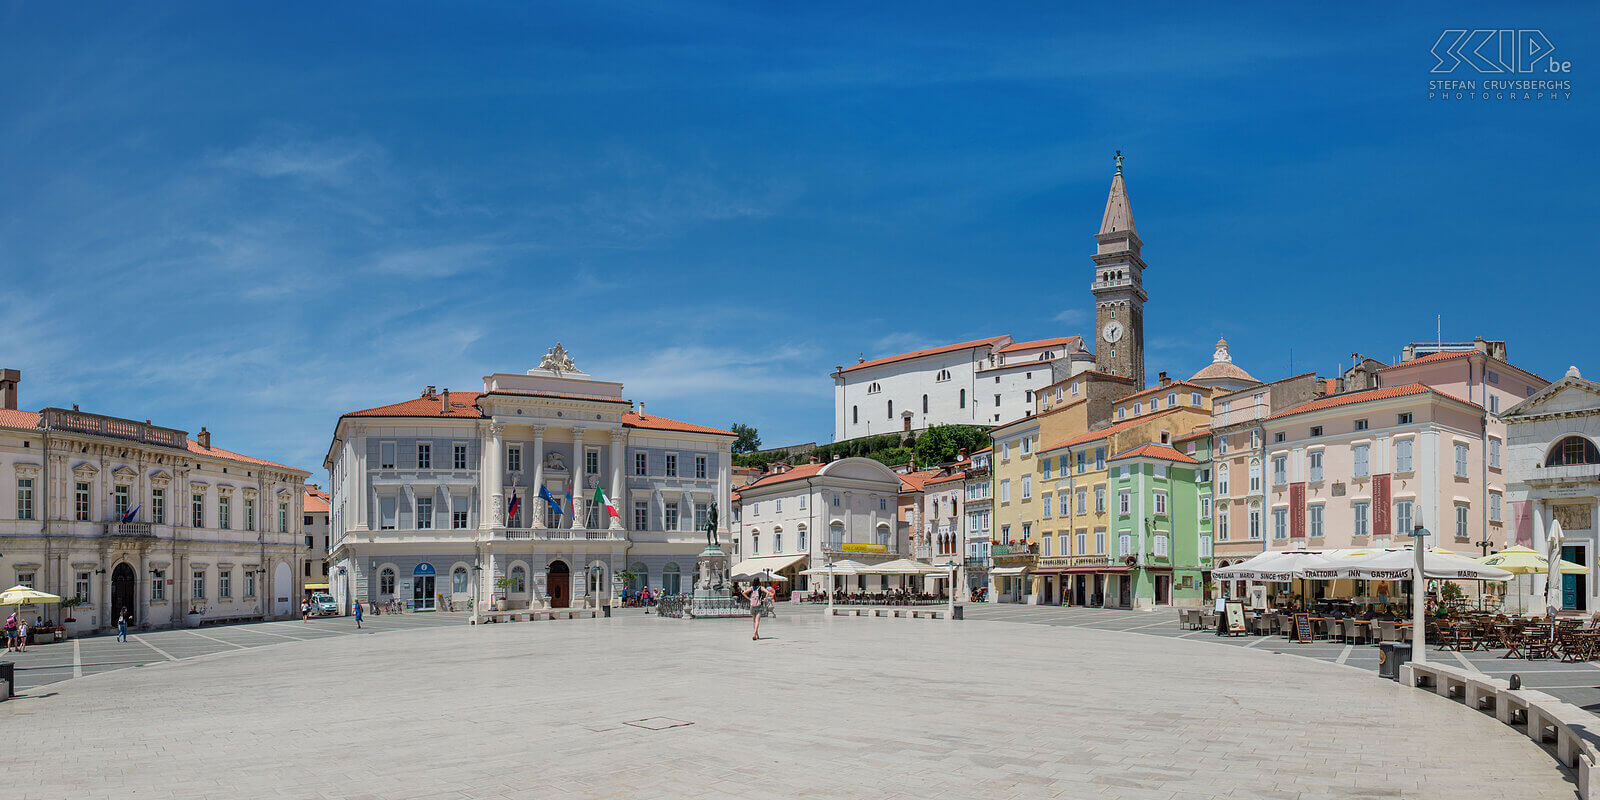 Piran - Tartini square The best known and most beautiful square in the town of Piran is Tartini Square, named after the famous 18th-century violinist Tartini. Stefan Cruysberghs